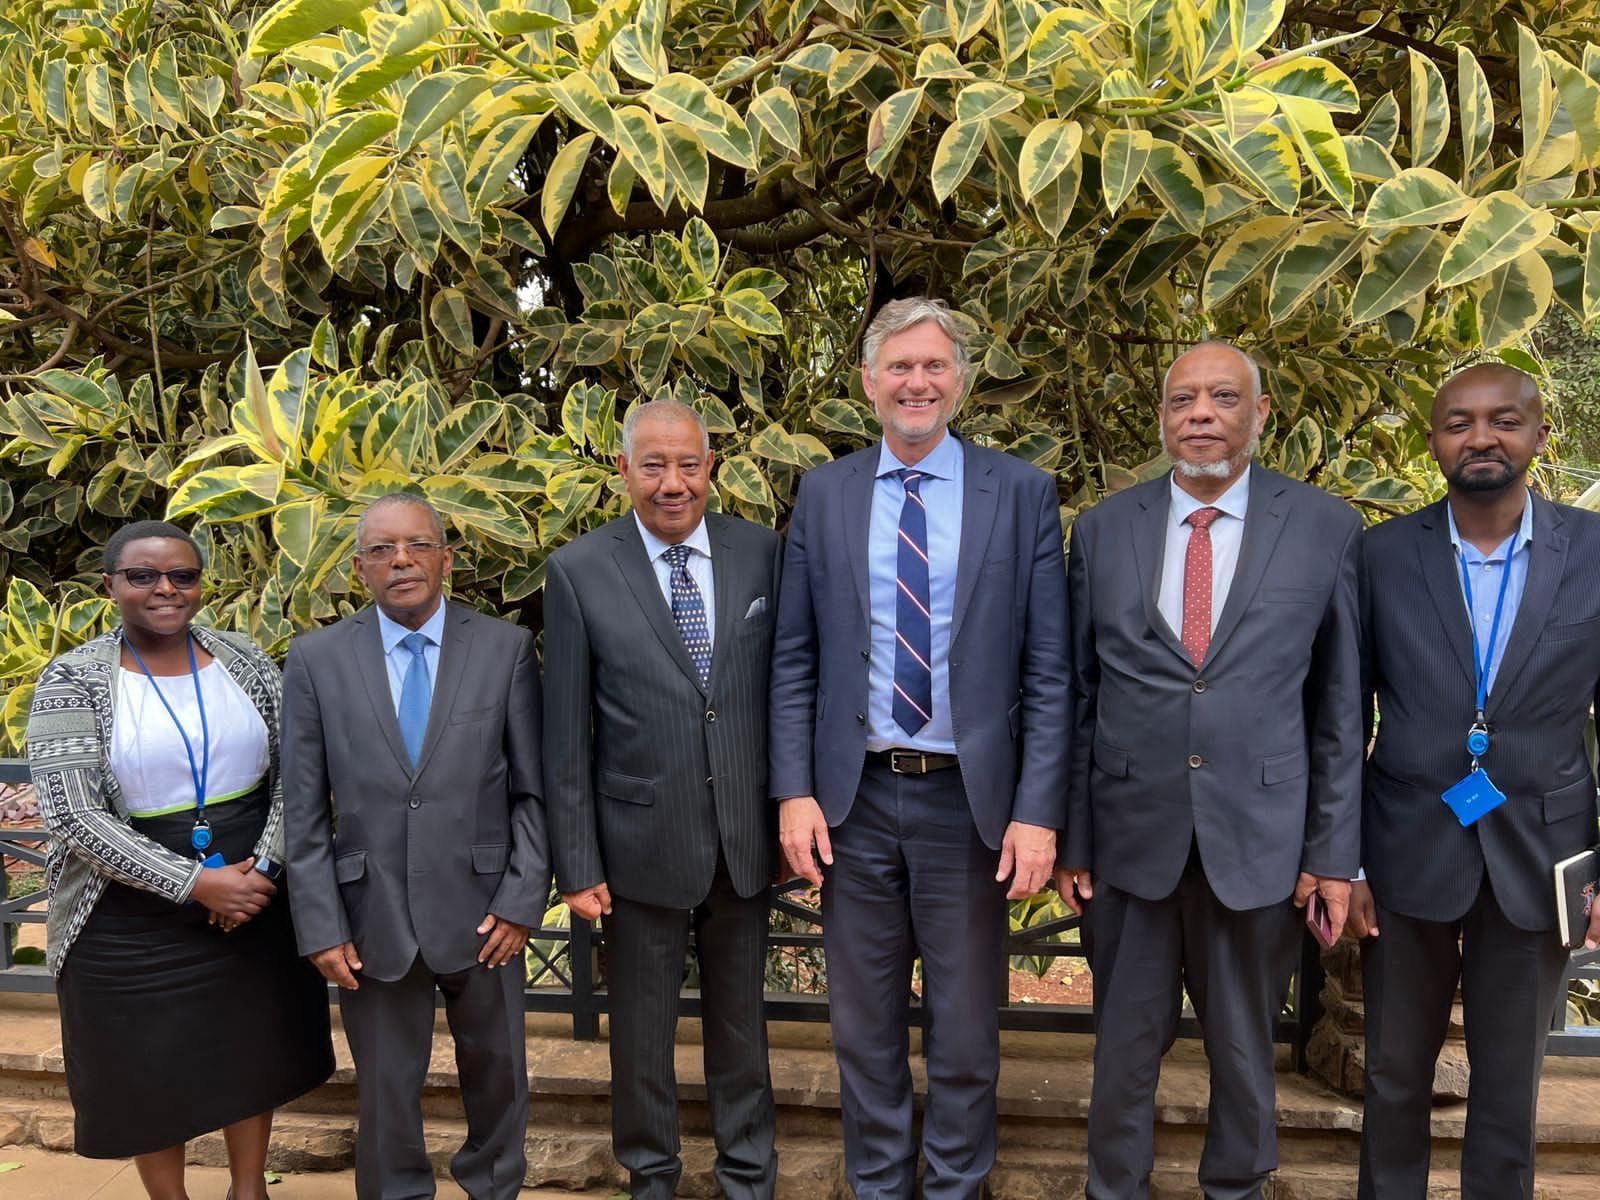 DANISH GOVERNMENT COMMITS TO SUPPORT LAMU IN IMPLEMENTATION OF WATER AND SANITATION PROJECTS